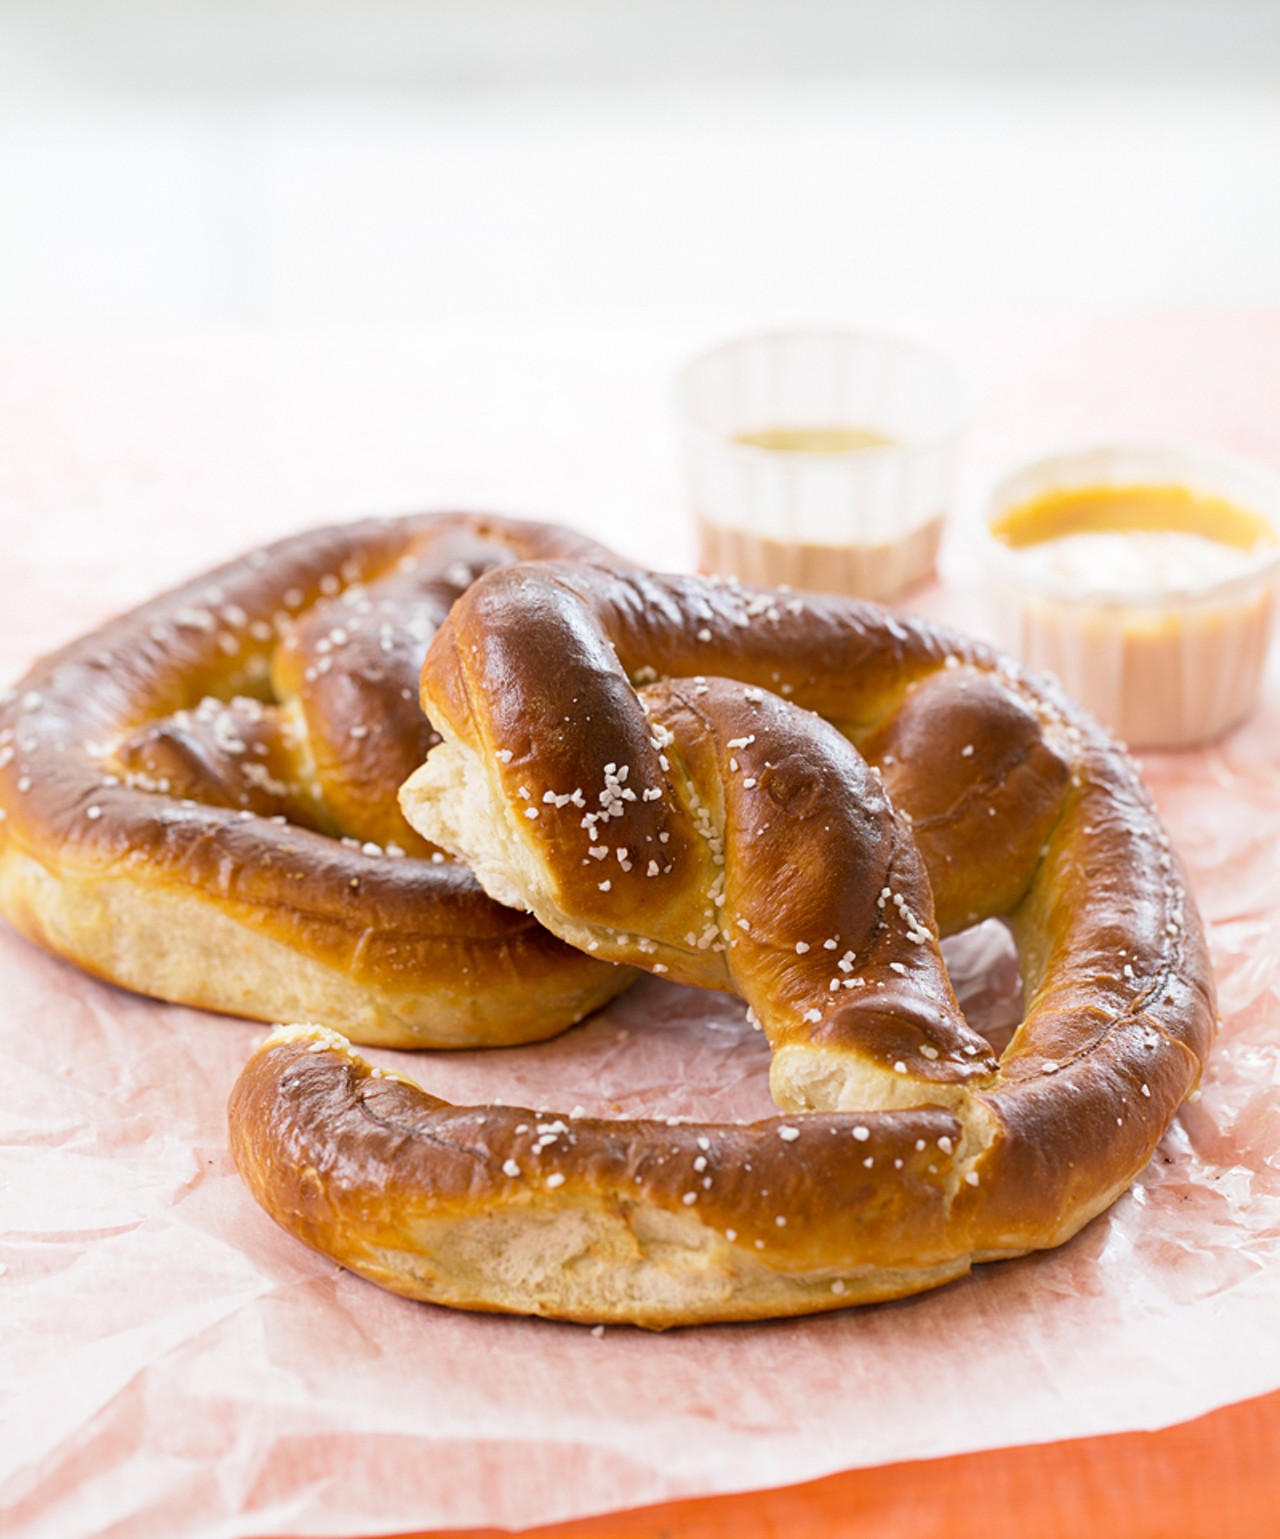 Two big soft pretzels. Buttered, salted, and toasted with dipping sauces.